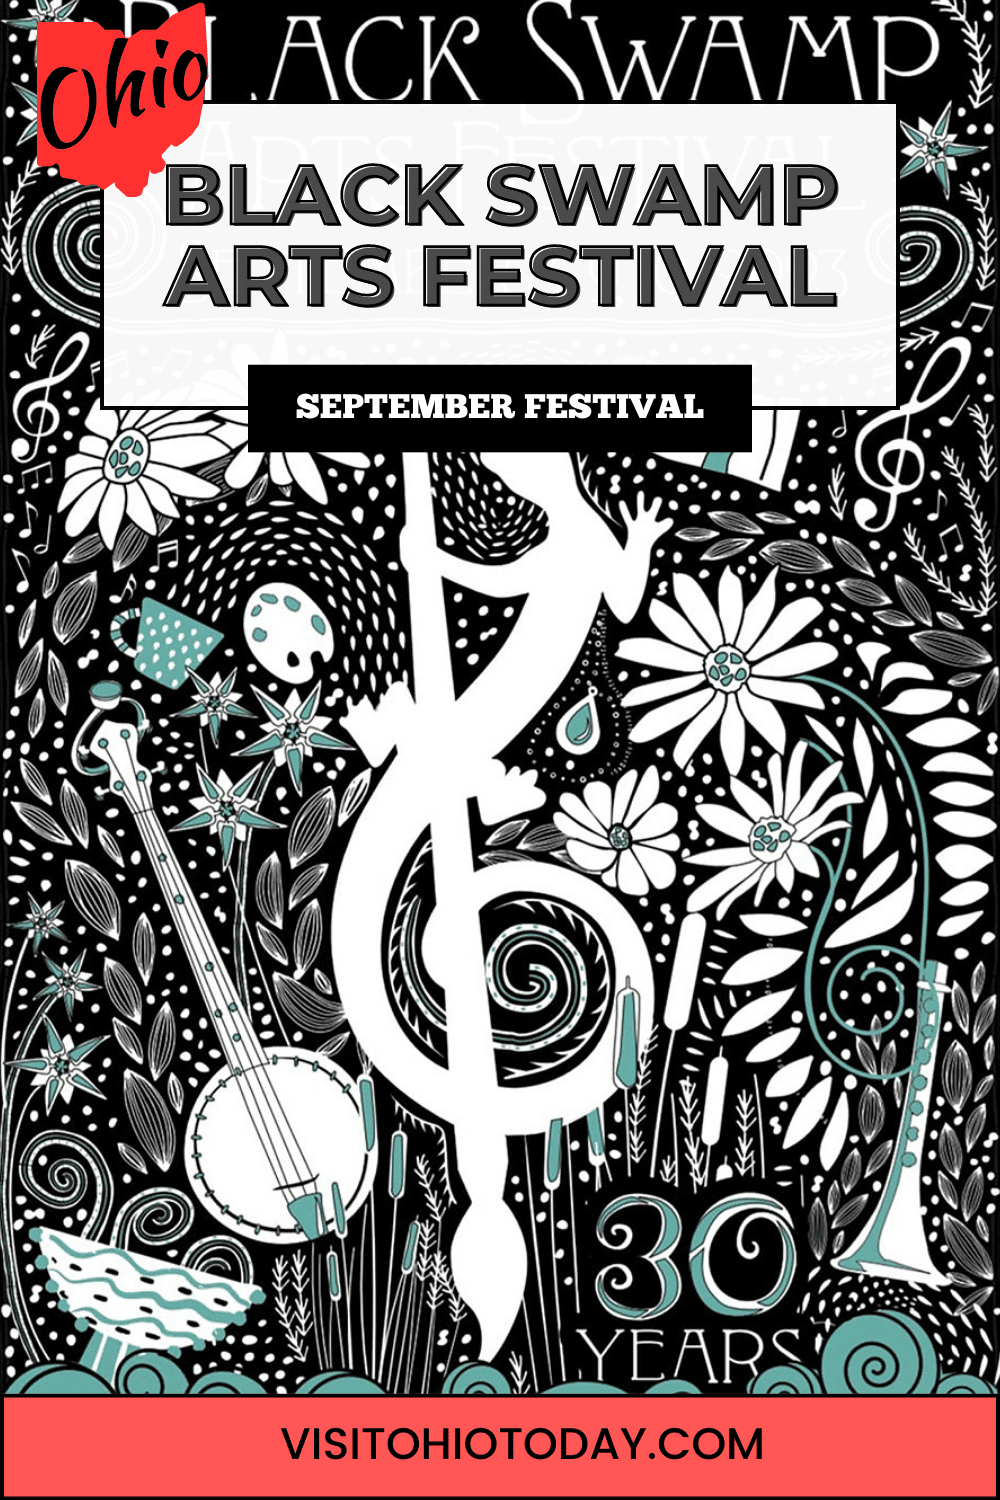 The Black Swamp Arts Festival, taking place from September 8 to 10, 2023, in Bowling Green, is a vibrant arts and live music celebration.